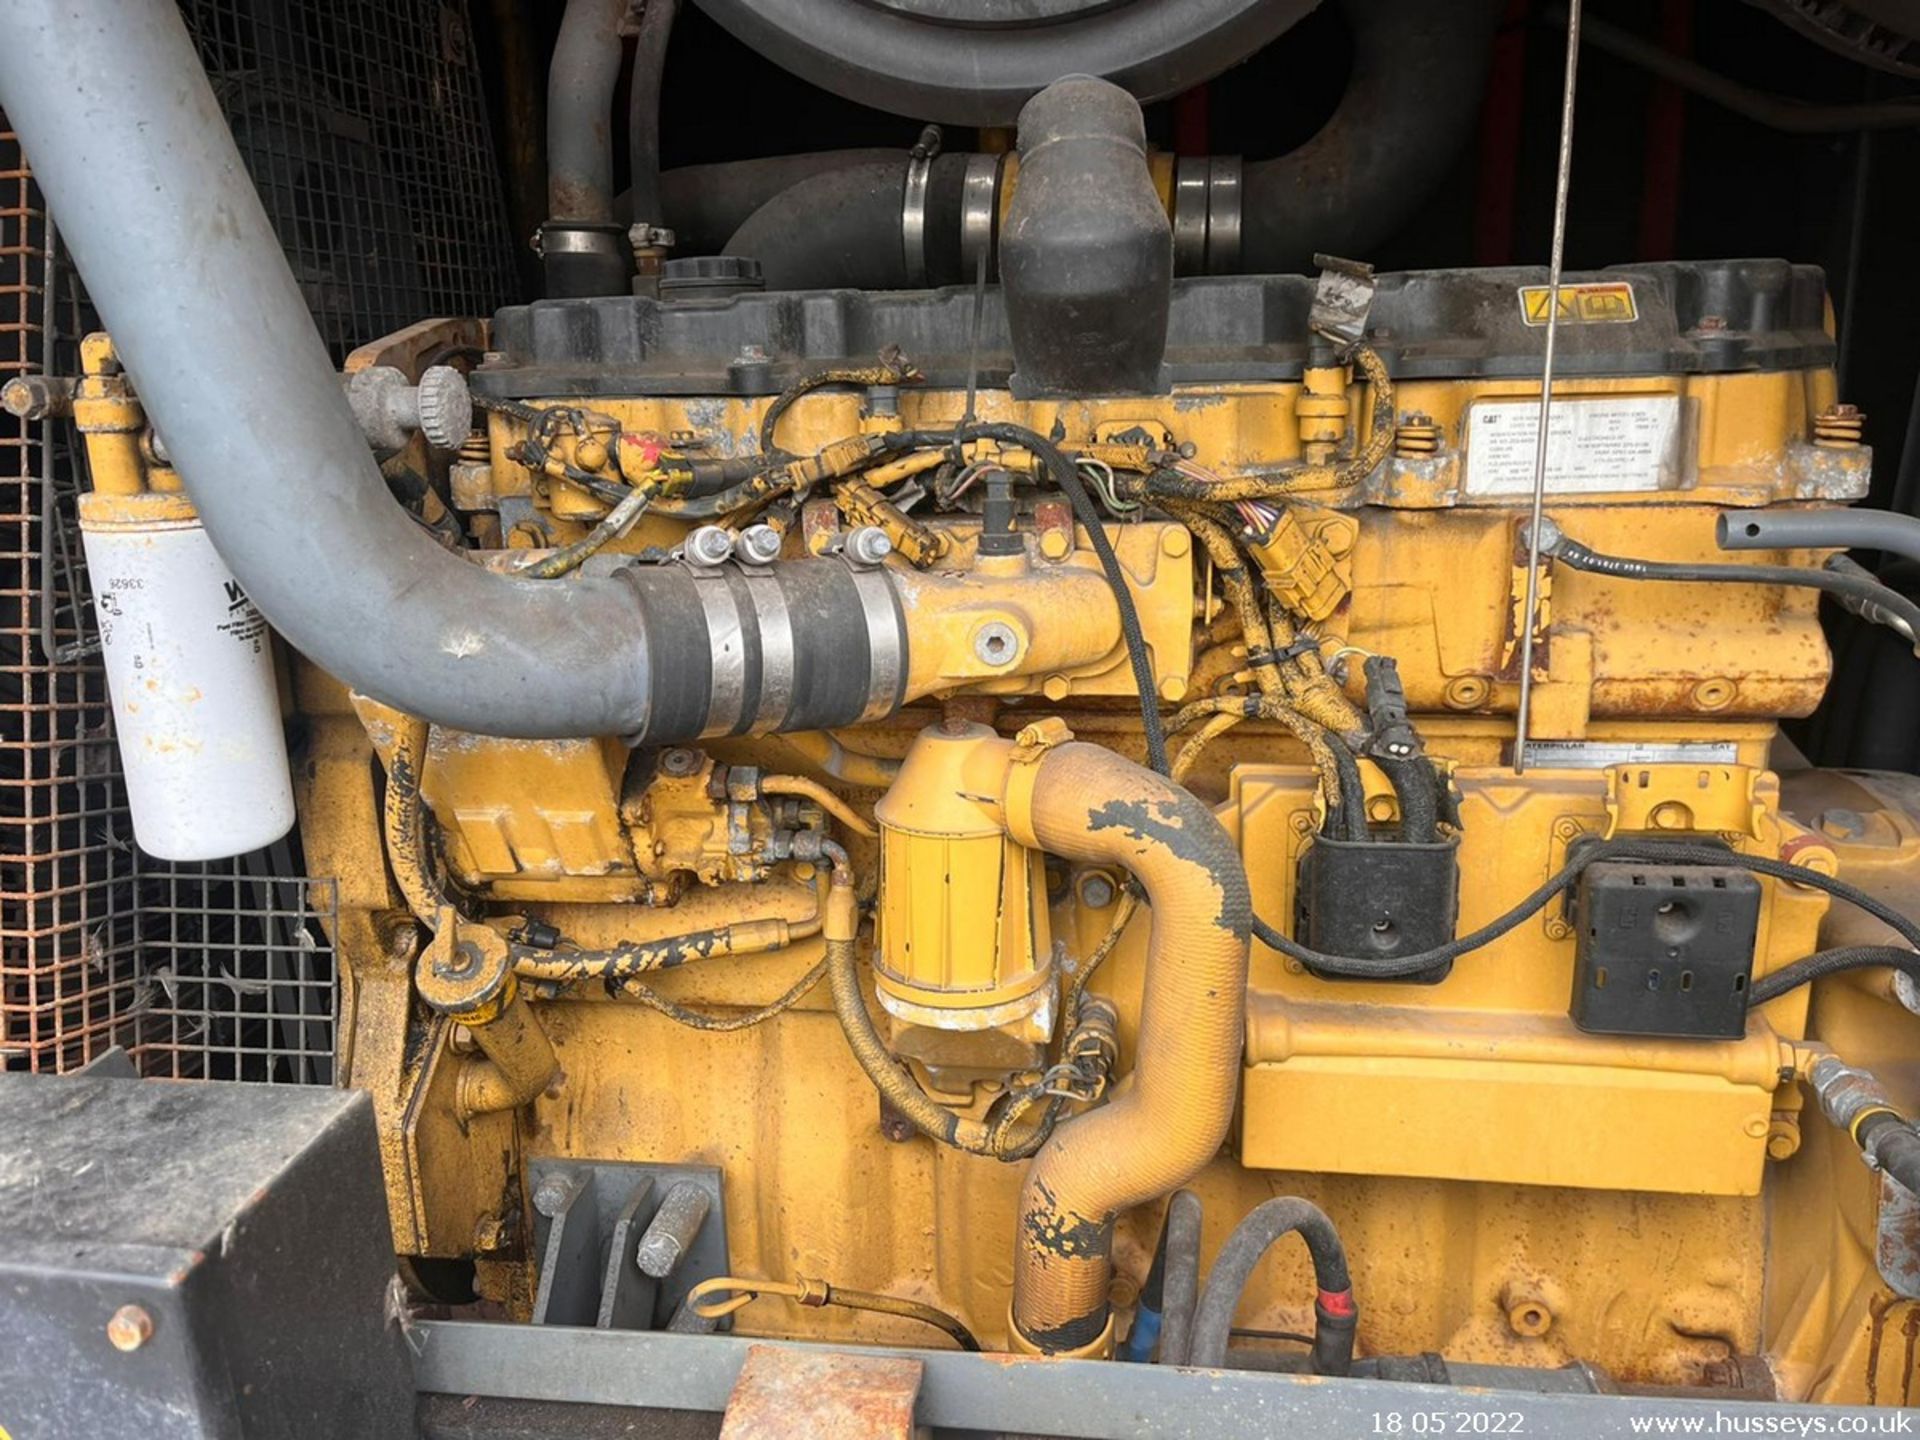 ATLAS COPCO XAHS426CD COMPRESSOR CAT DIESEL ENGINE BIG AIR 900 CFM RMA (THE ONSITE FORKLIFT WILL NO - Image 6 of 7